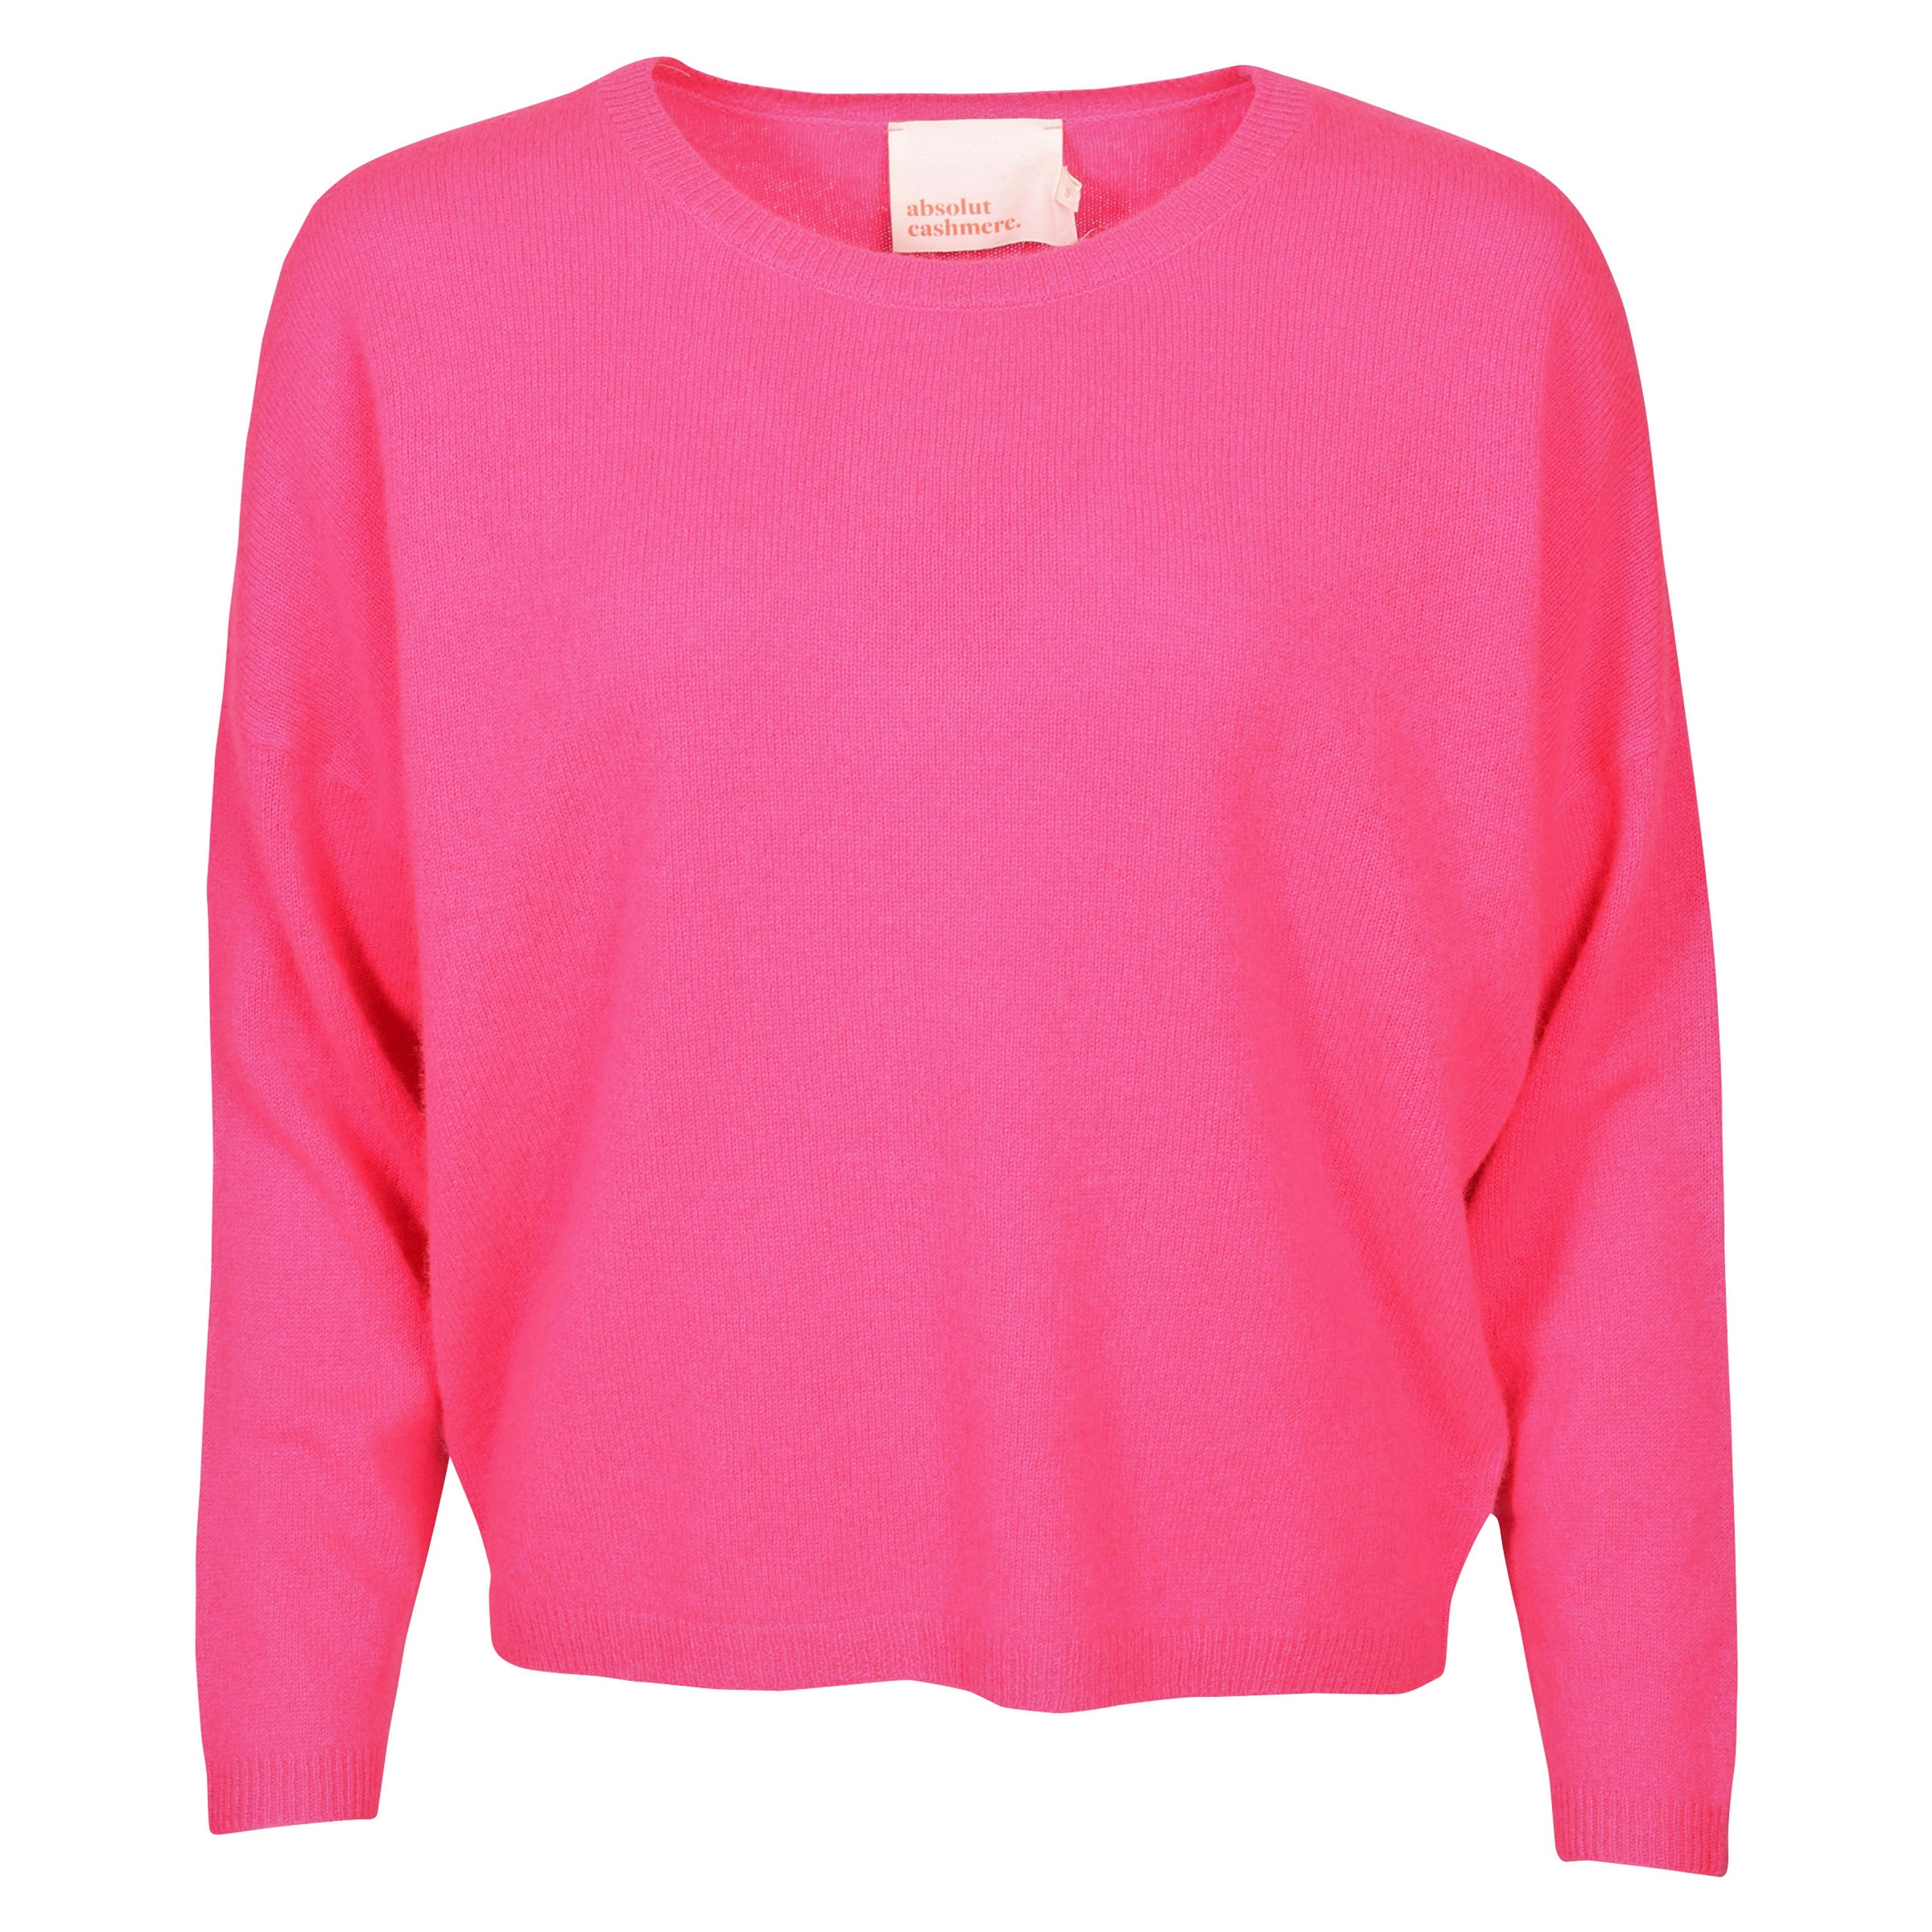 Absolut Cashmere Kaira Cashmere Pullover in Rose Fluo L